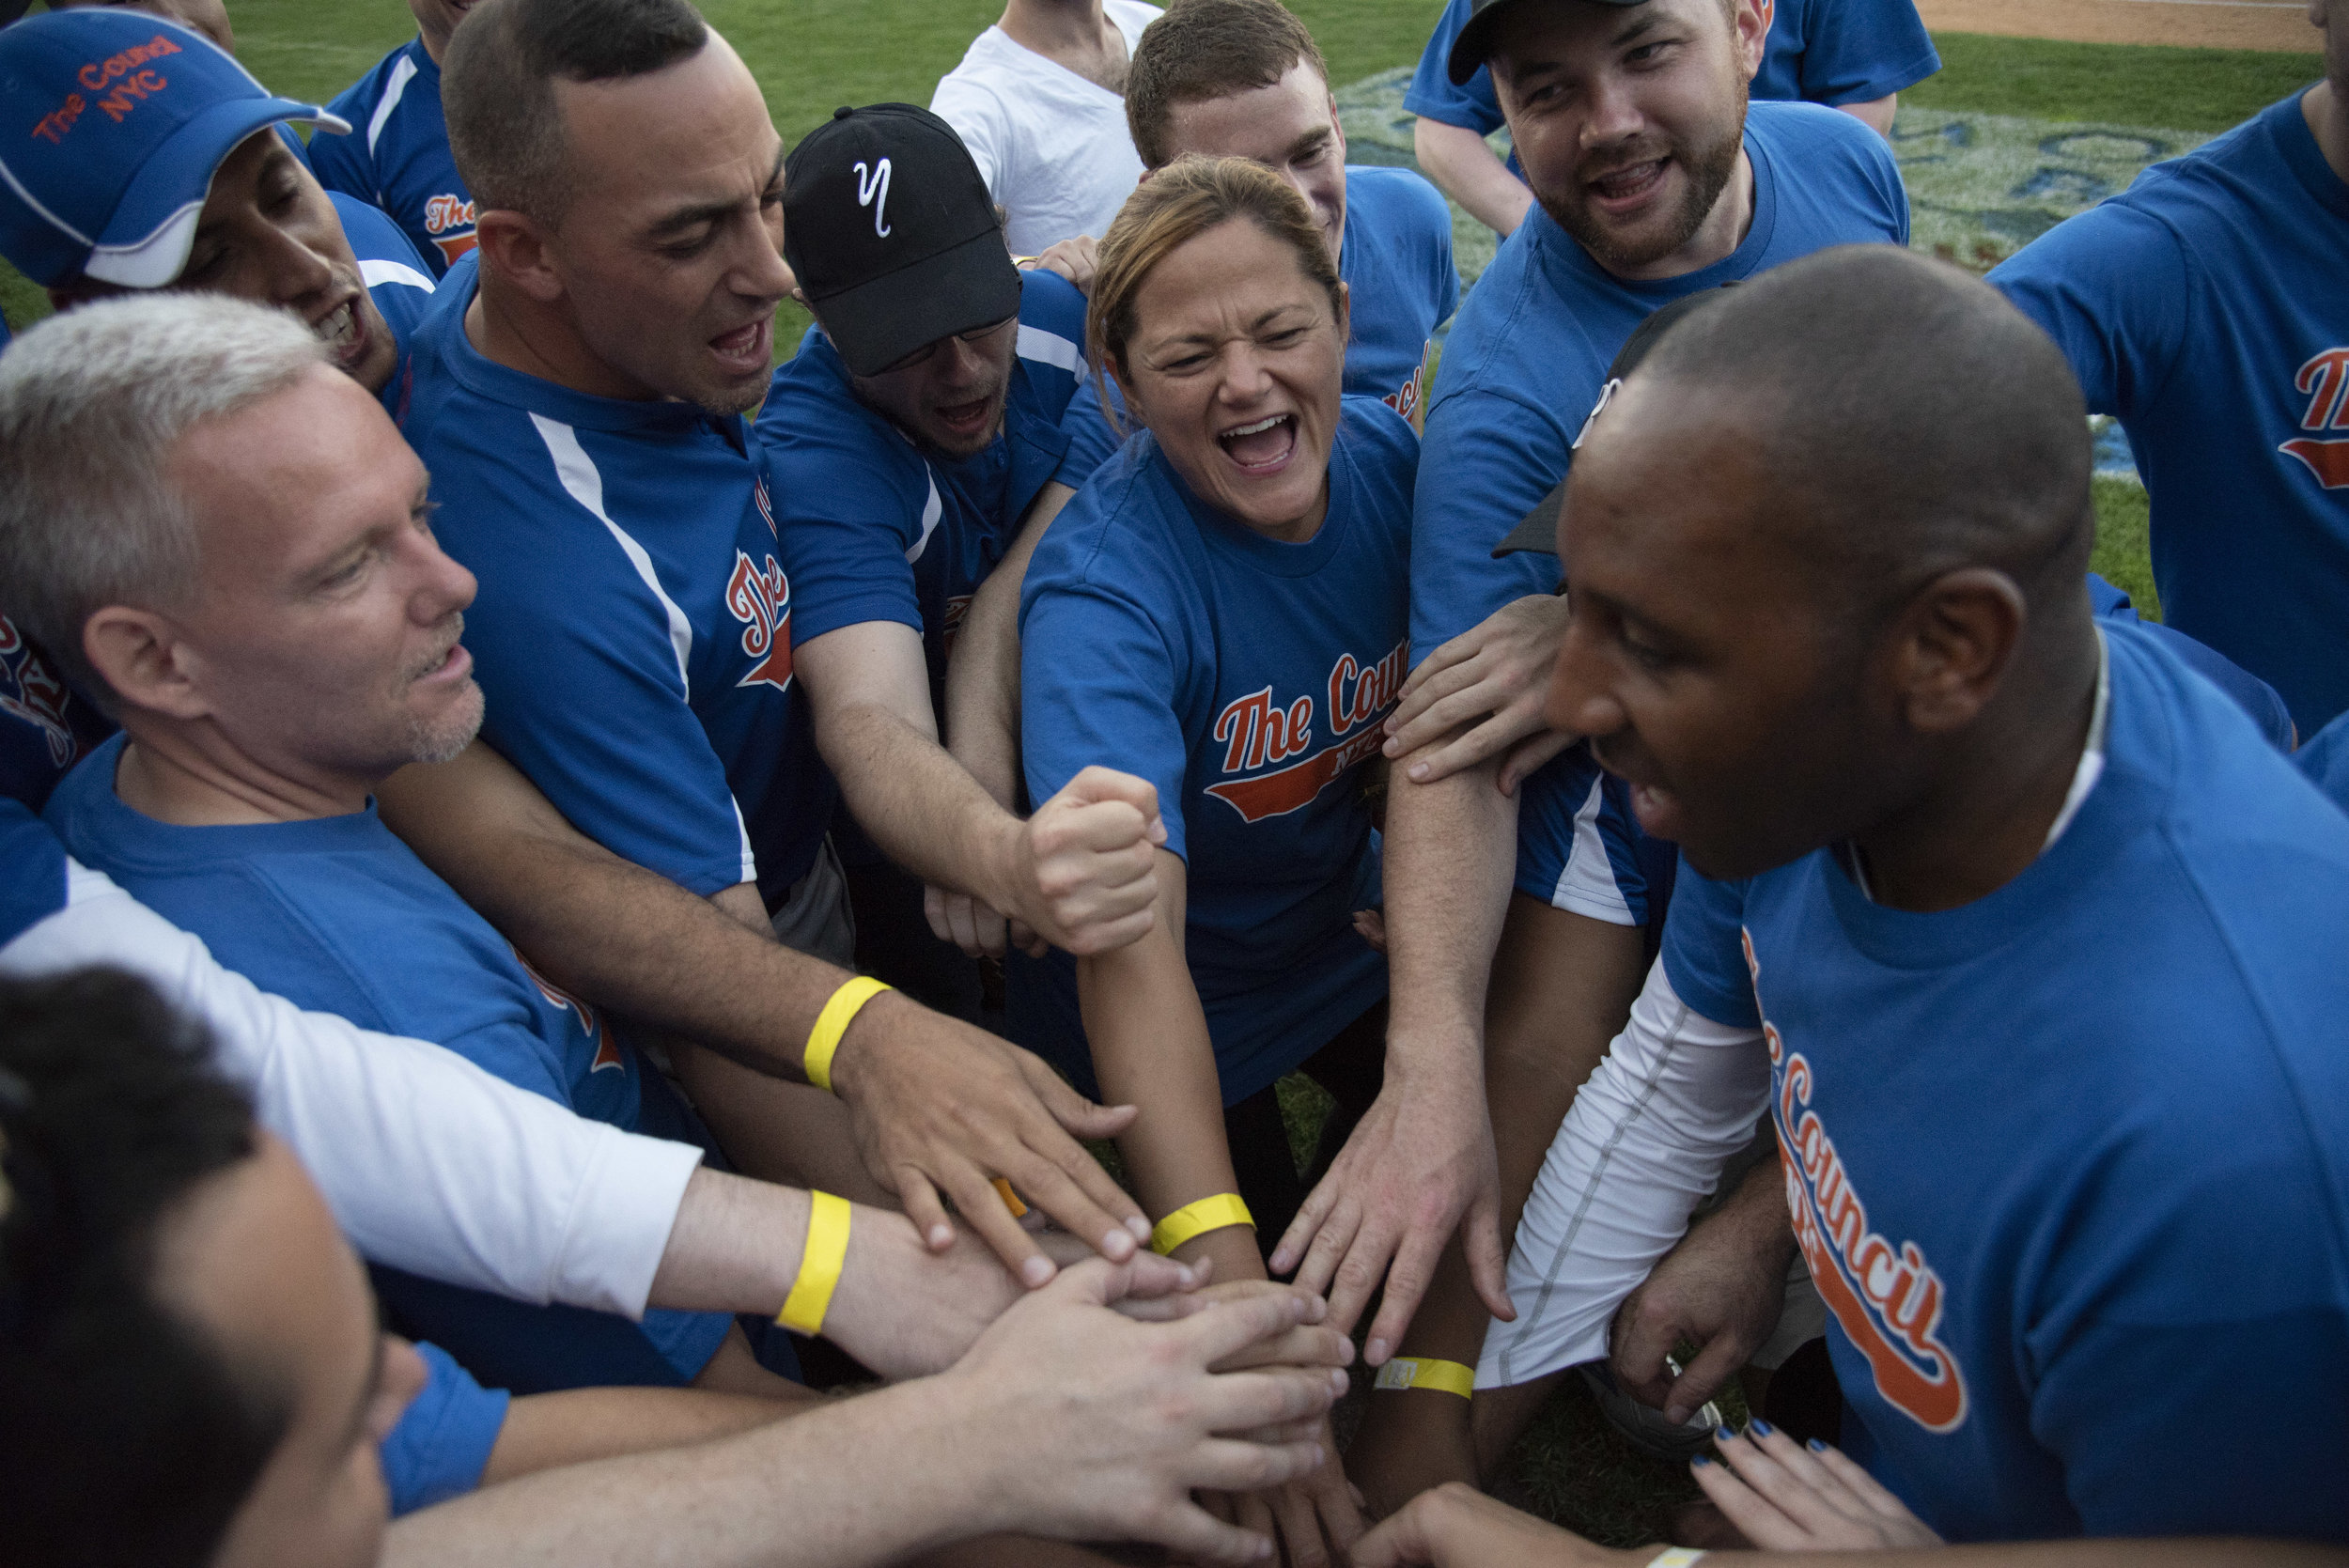 The New York City Council Gets Ready To Take On The Mayors Office In Their Annual Softball Game